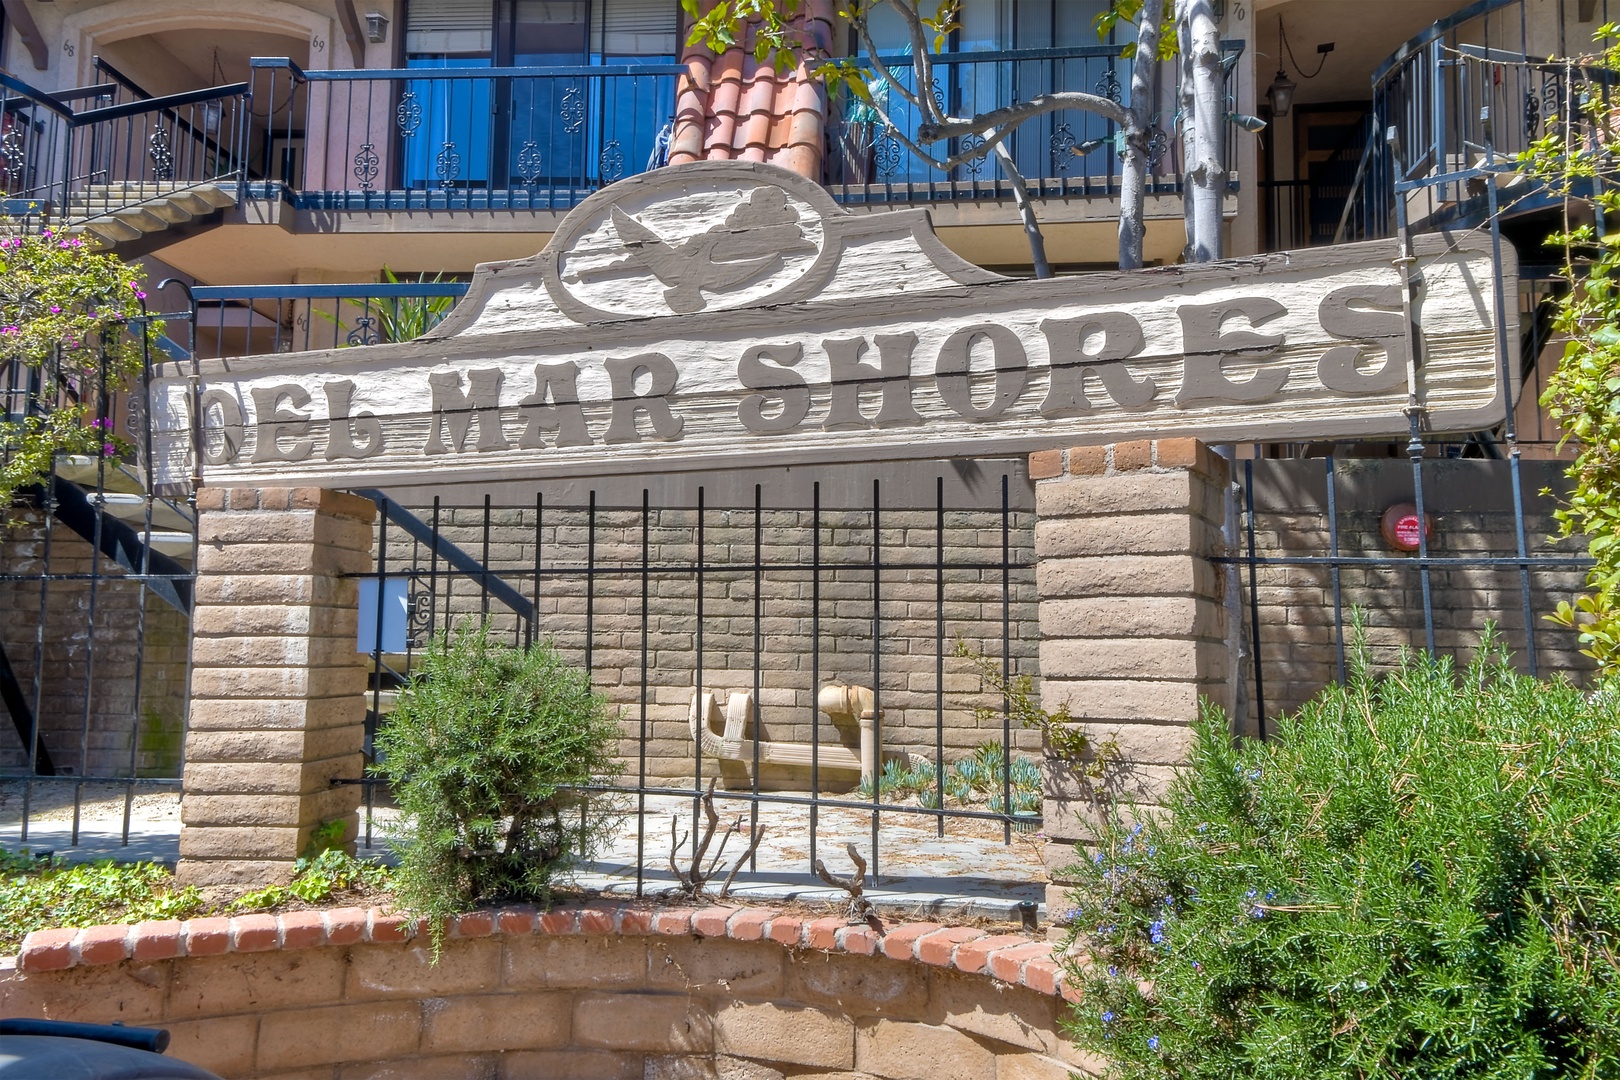 Enjoy your stay at the Del Mar Shores resort community!